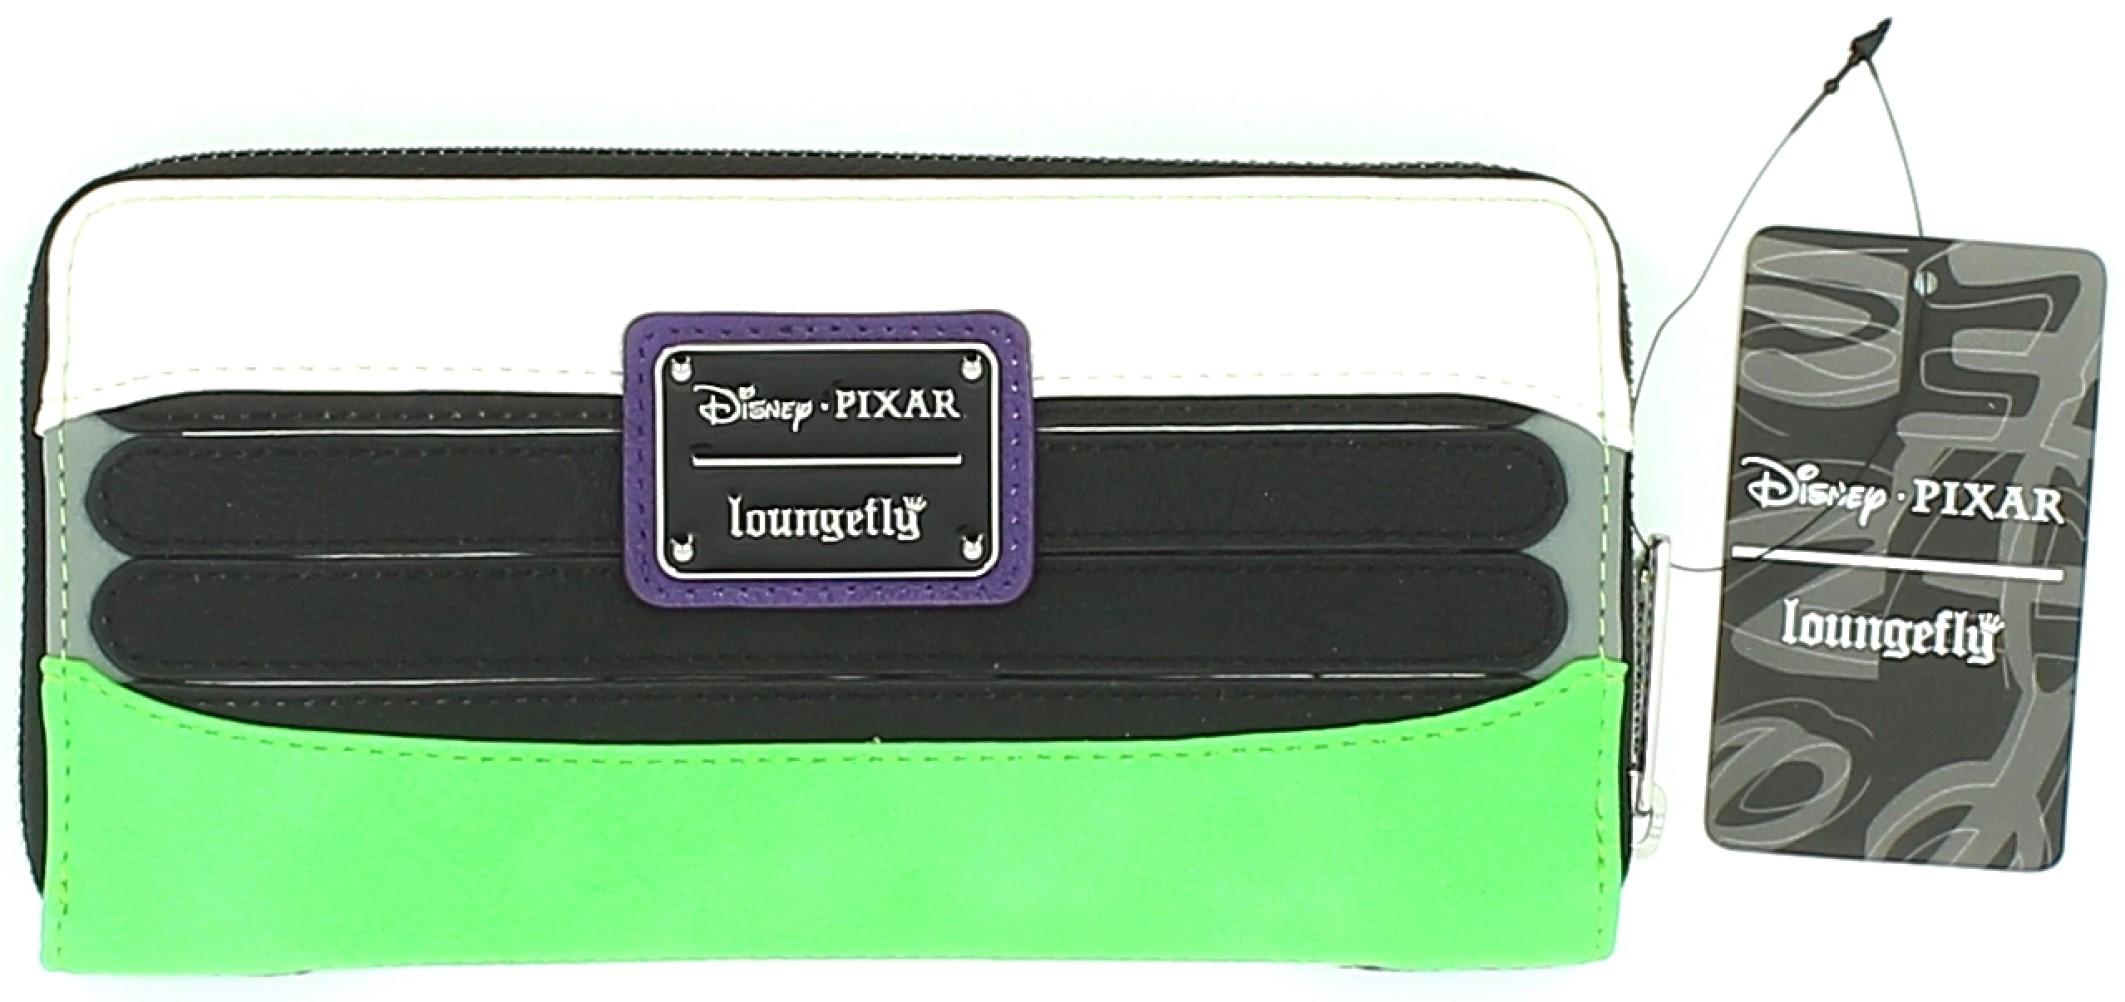 Loungefly Buzz Lightyear Ziparound Wallet from Toy Story by Pixar